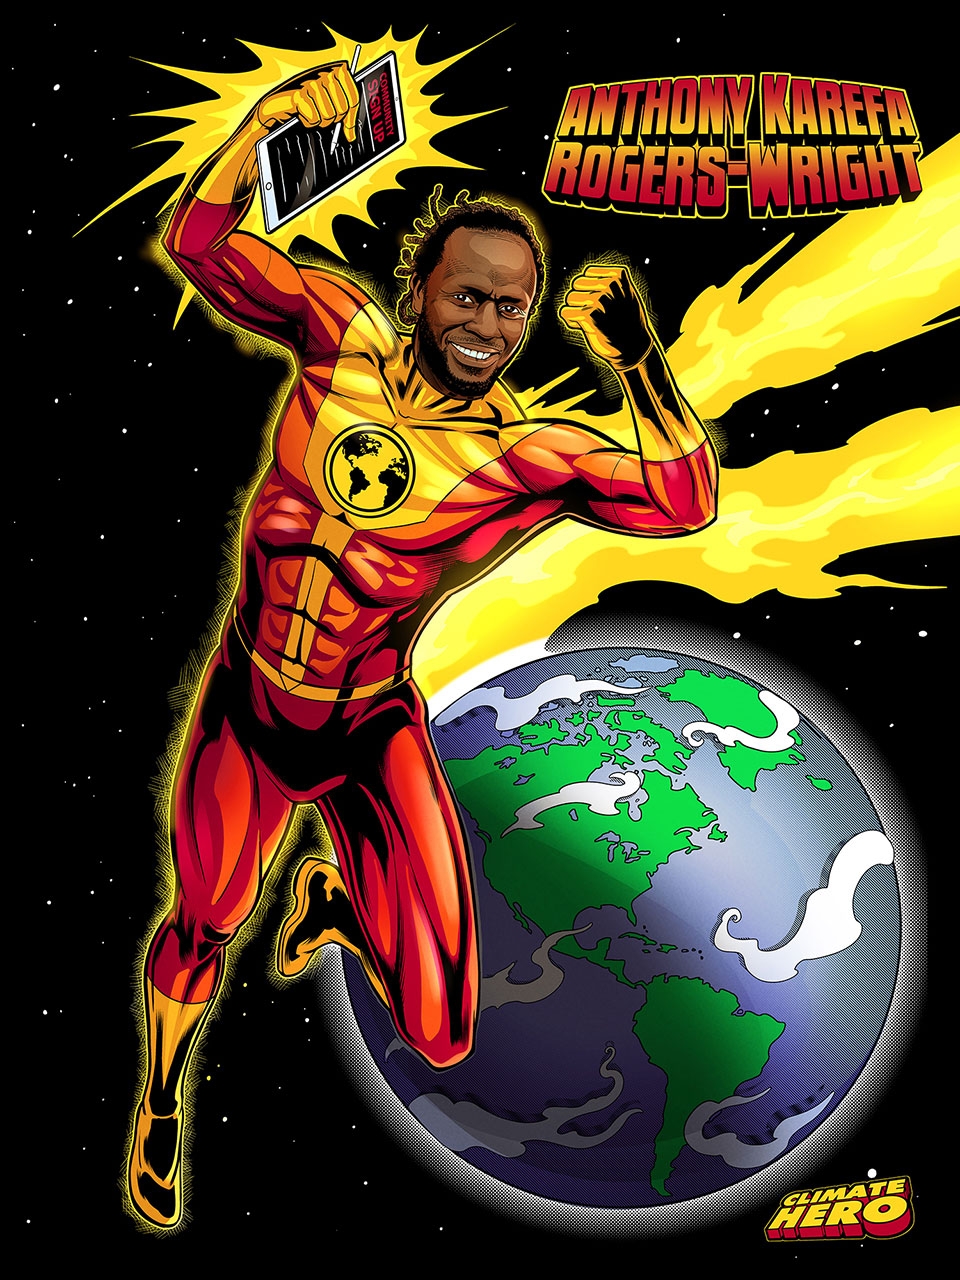 Anthony Karefa Rogers-Wright, Social and climate justice advocate. Artwork by Jeremy Packer